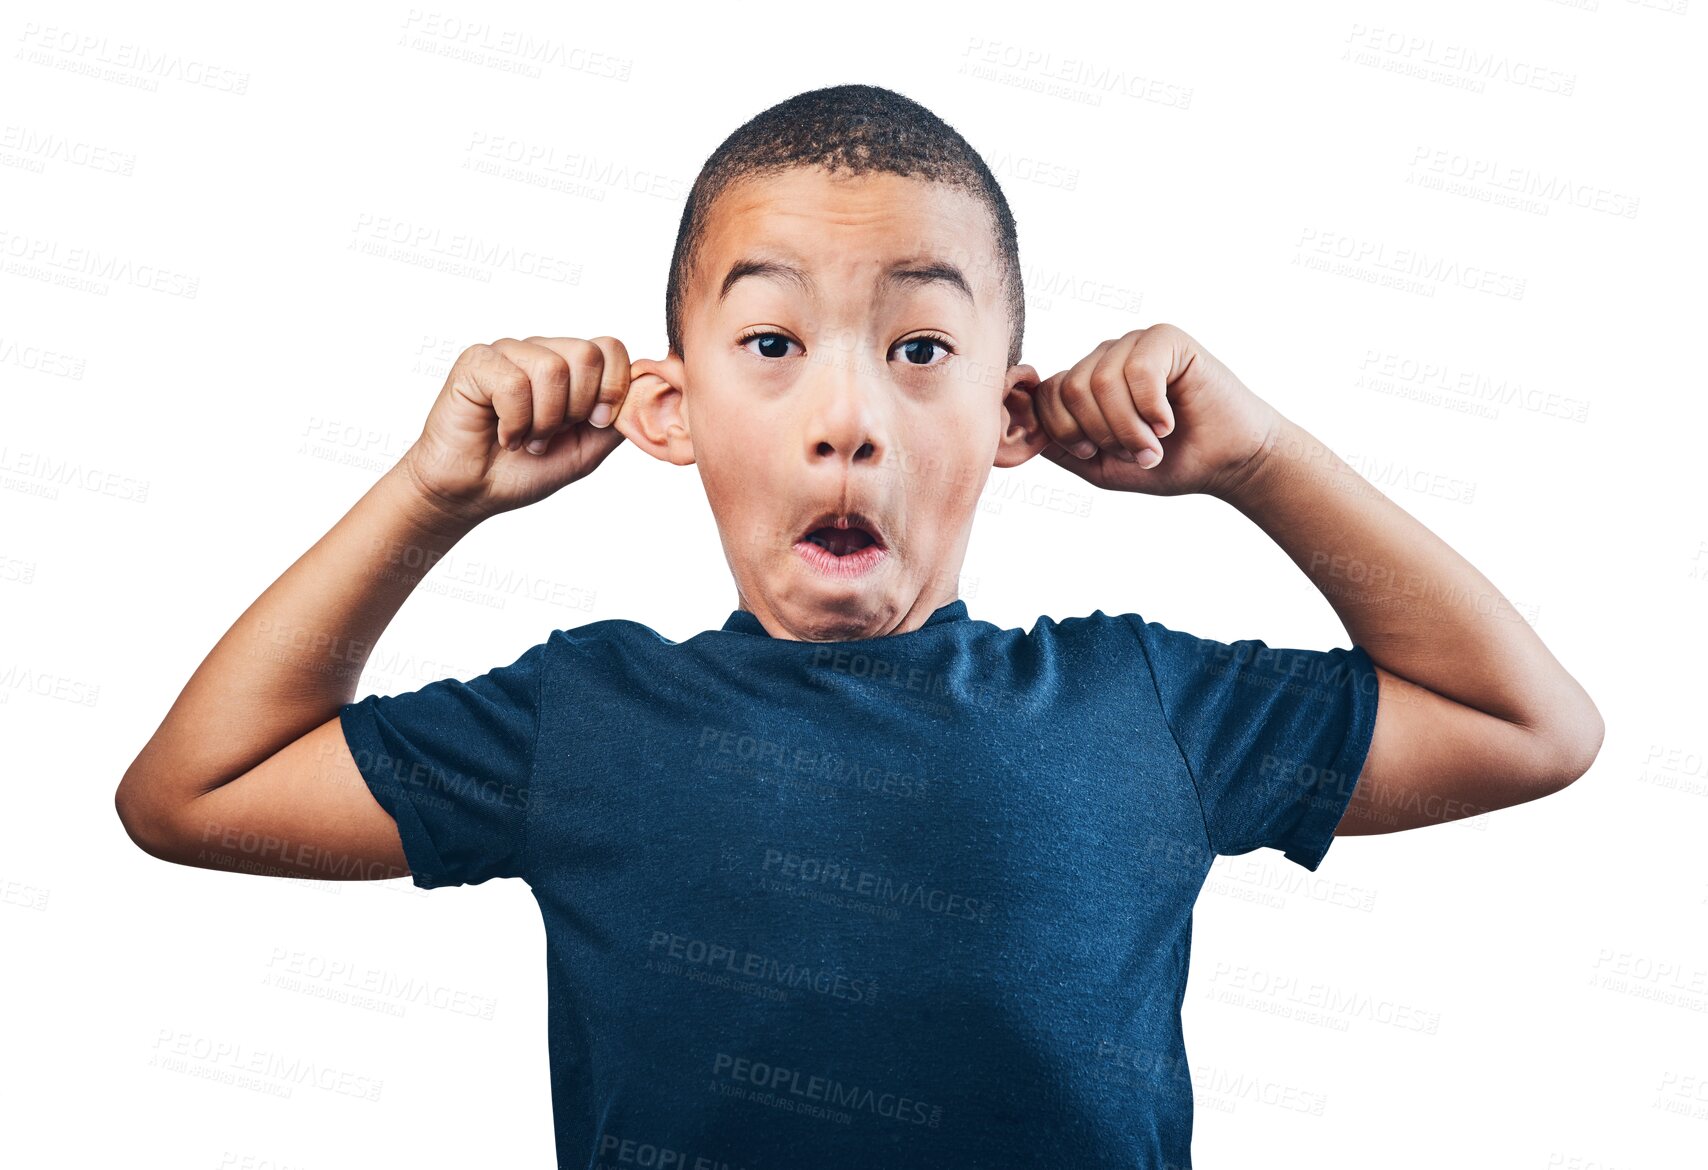 Buy stock photo Portrait, funny and child pulling ears for listening, attention or comedy on transparent, isolated or png background. Face, kid or boy with crazy expression, gesture or silly and goofy humor